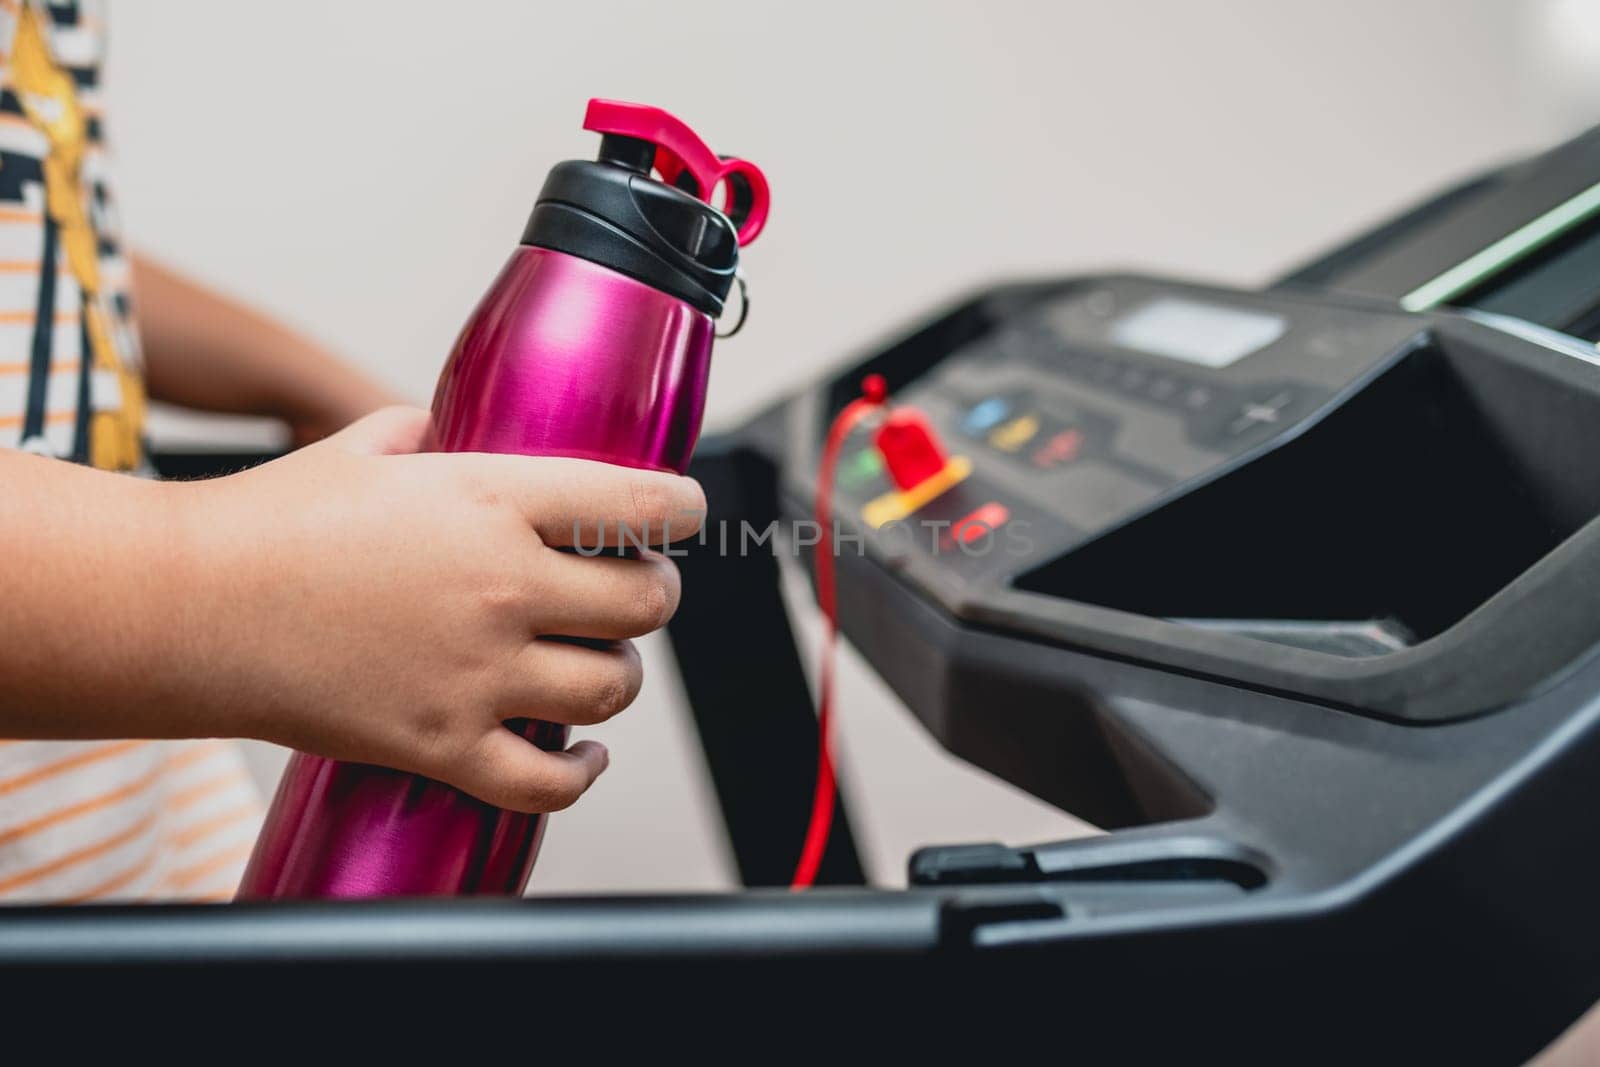 Young girl running on the treadmill with a sports water bottle in hand by Sonat